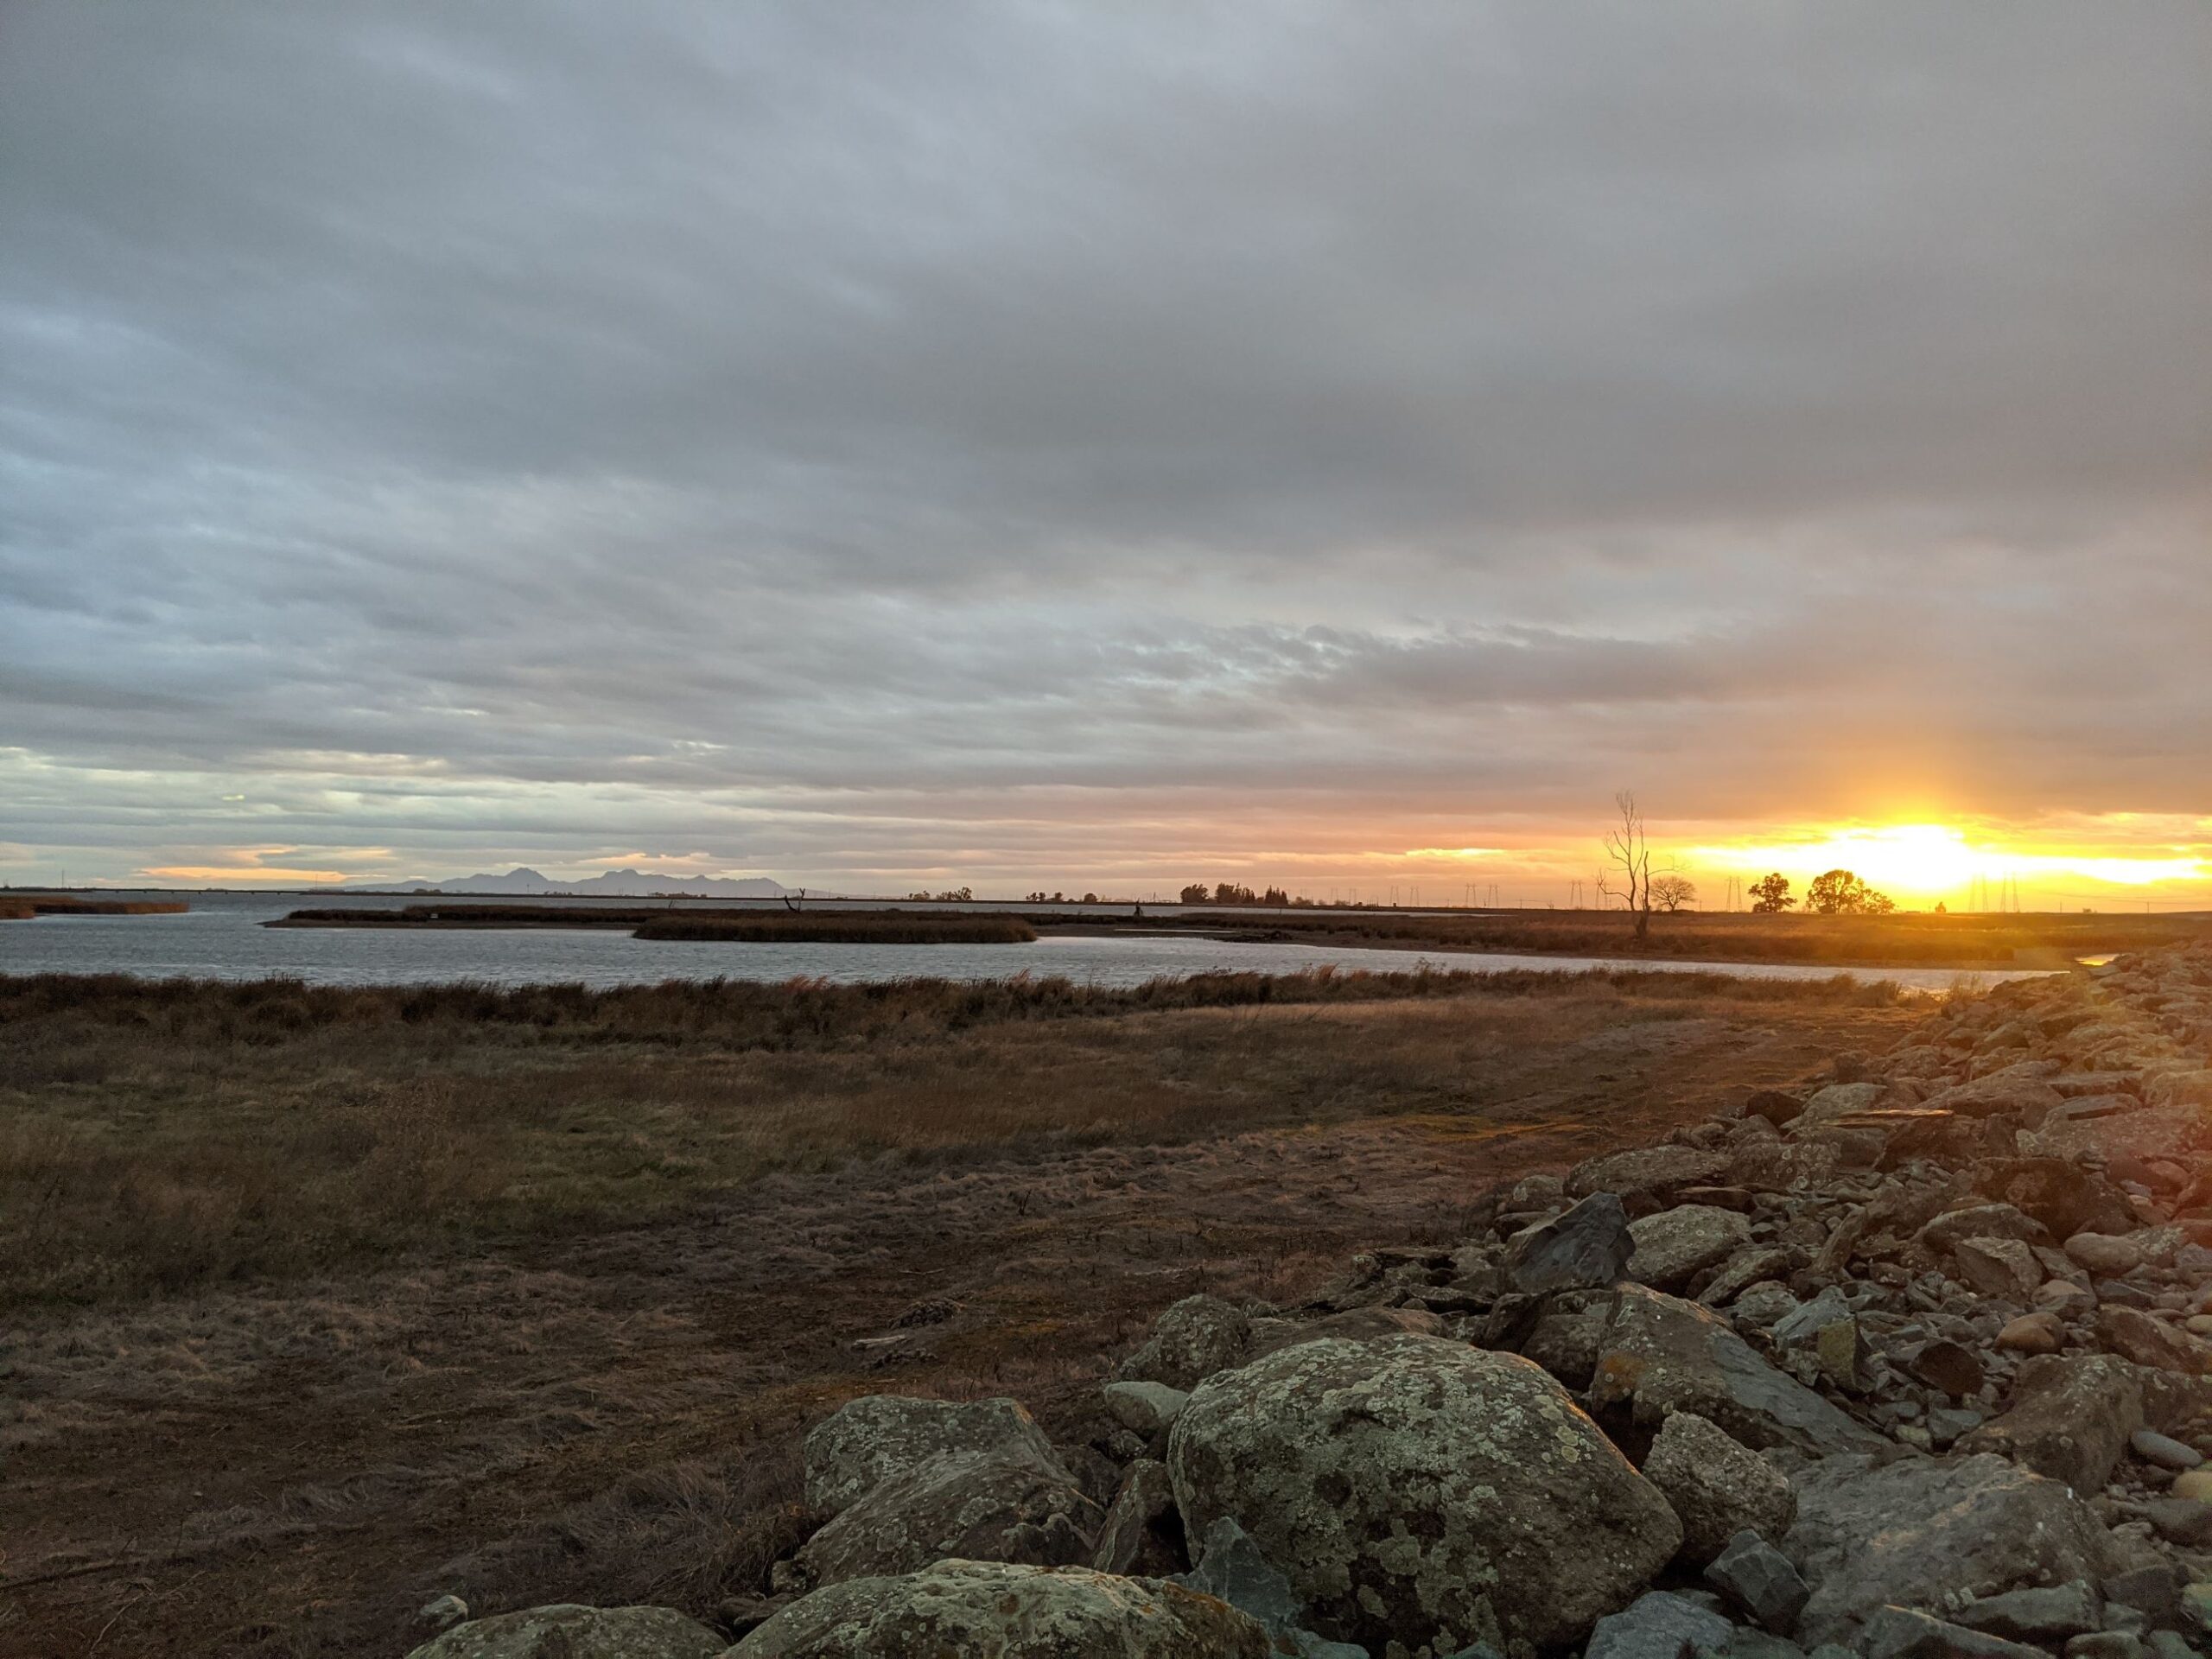 A photograph of sunset over a shallow estuary